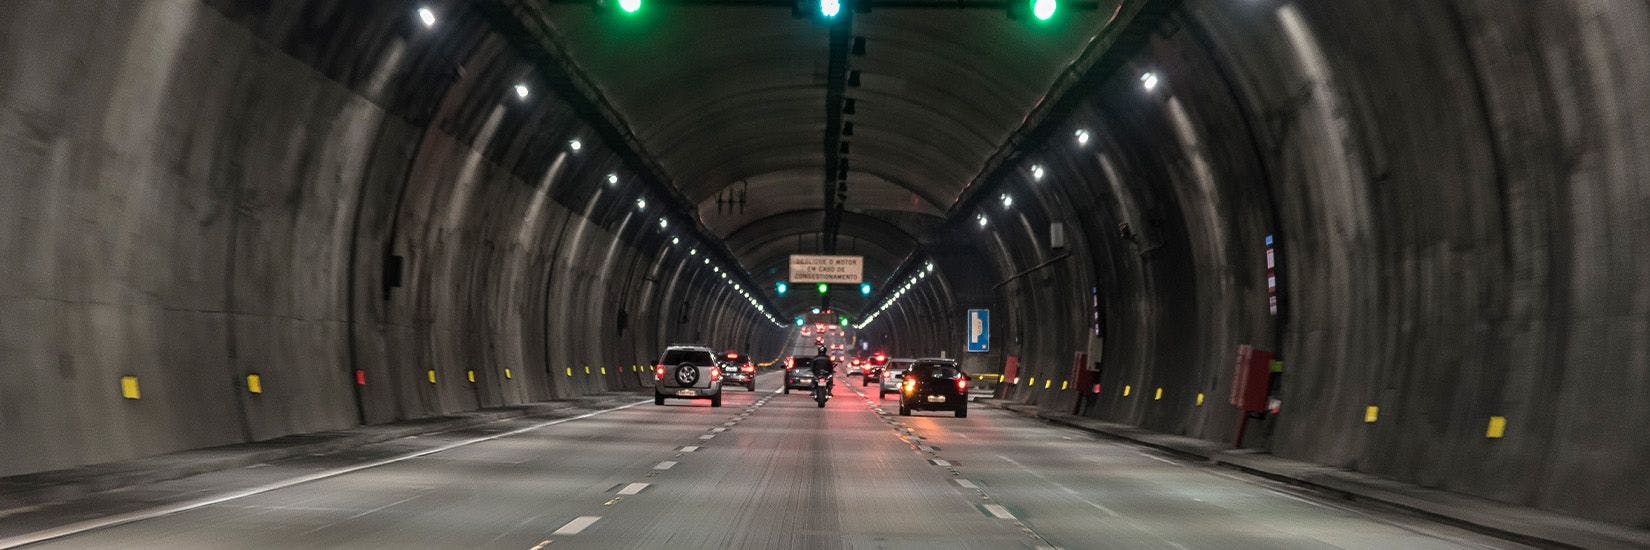 Image of tunnel with cars driving